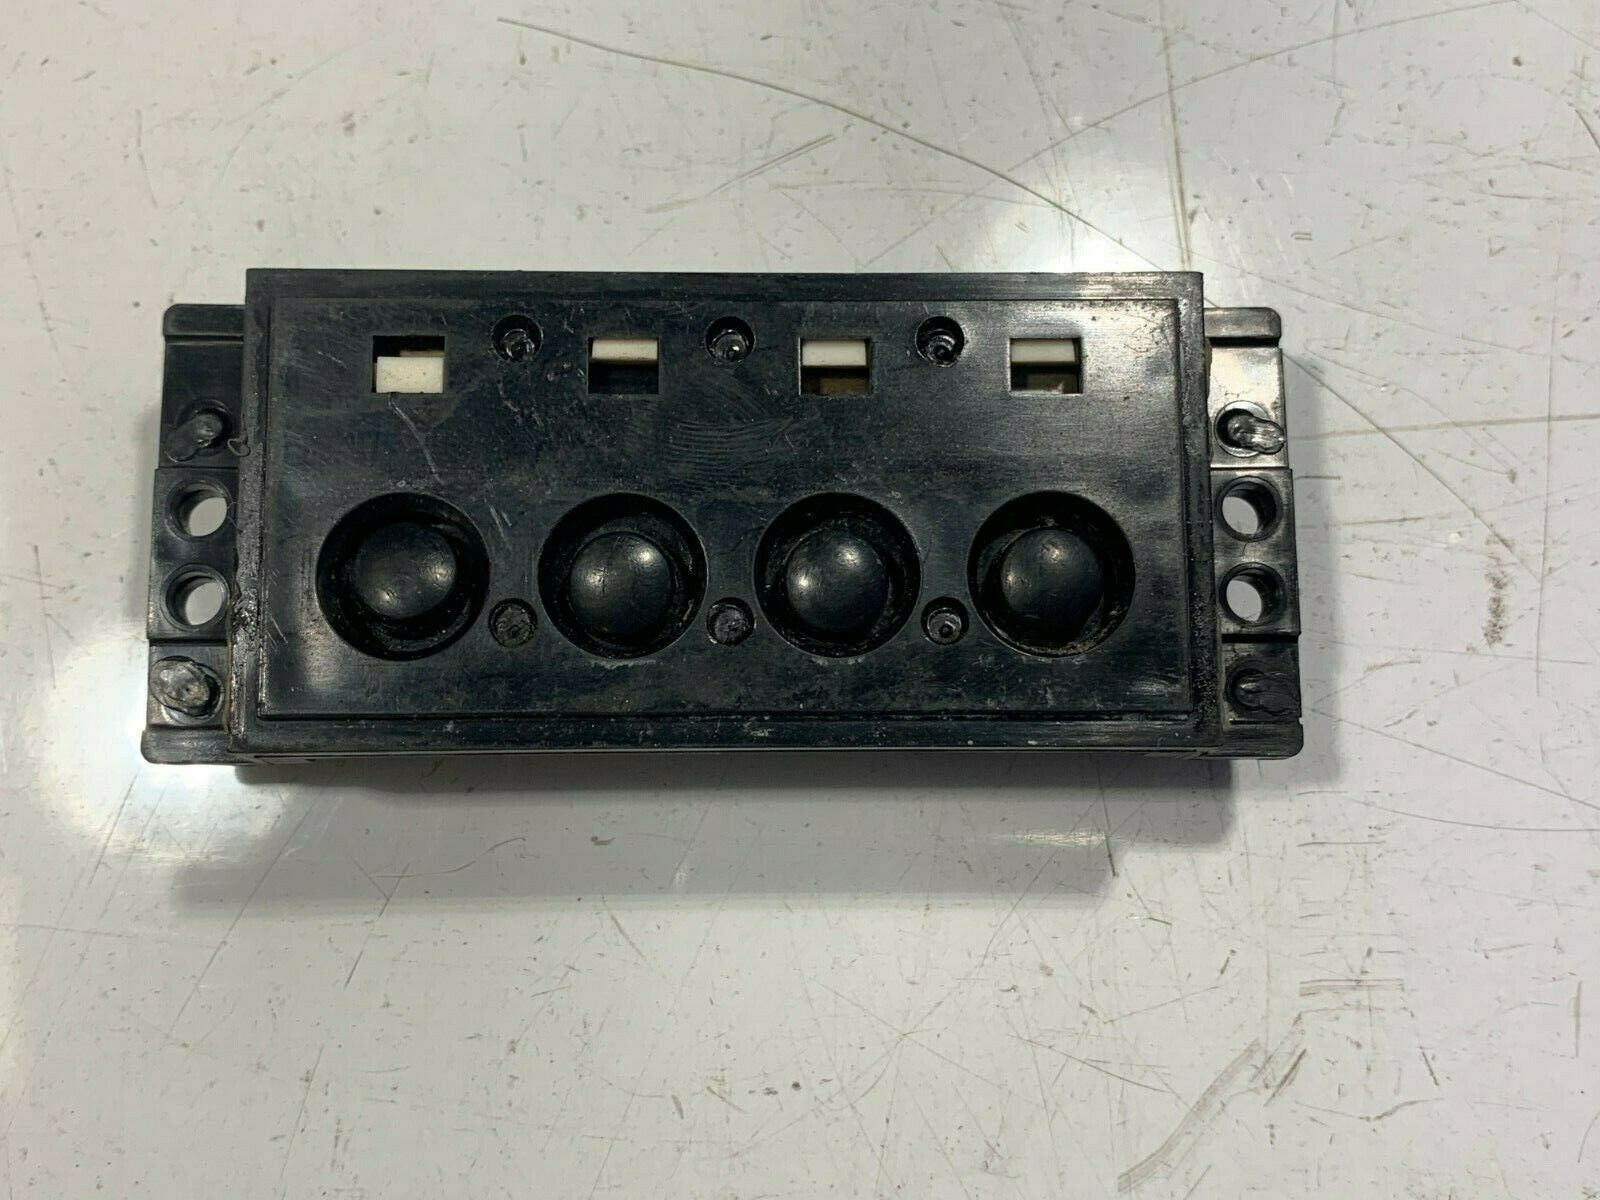 Primary image for Washer Switch, Push Button (Cycle Selector) Dexter P/N: 9539-479-005 [Used]